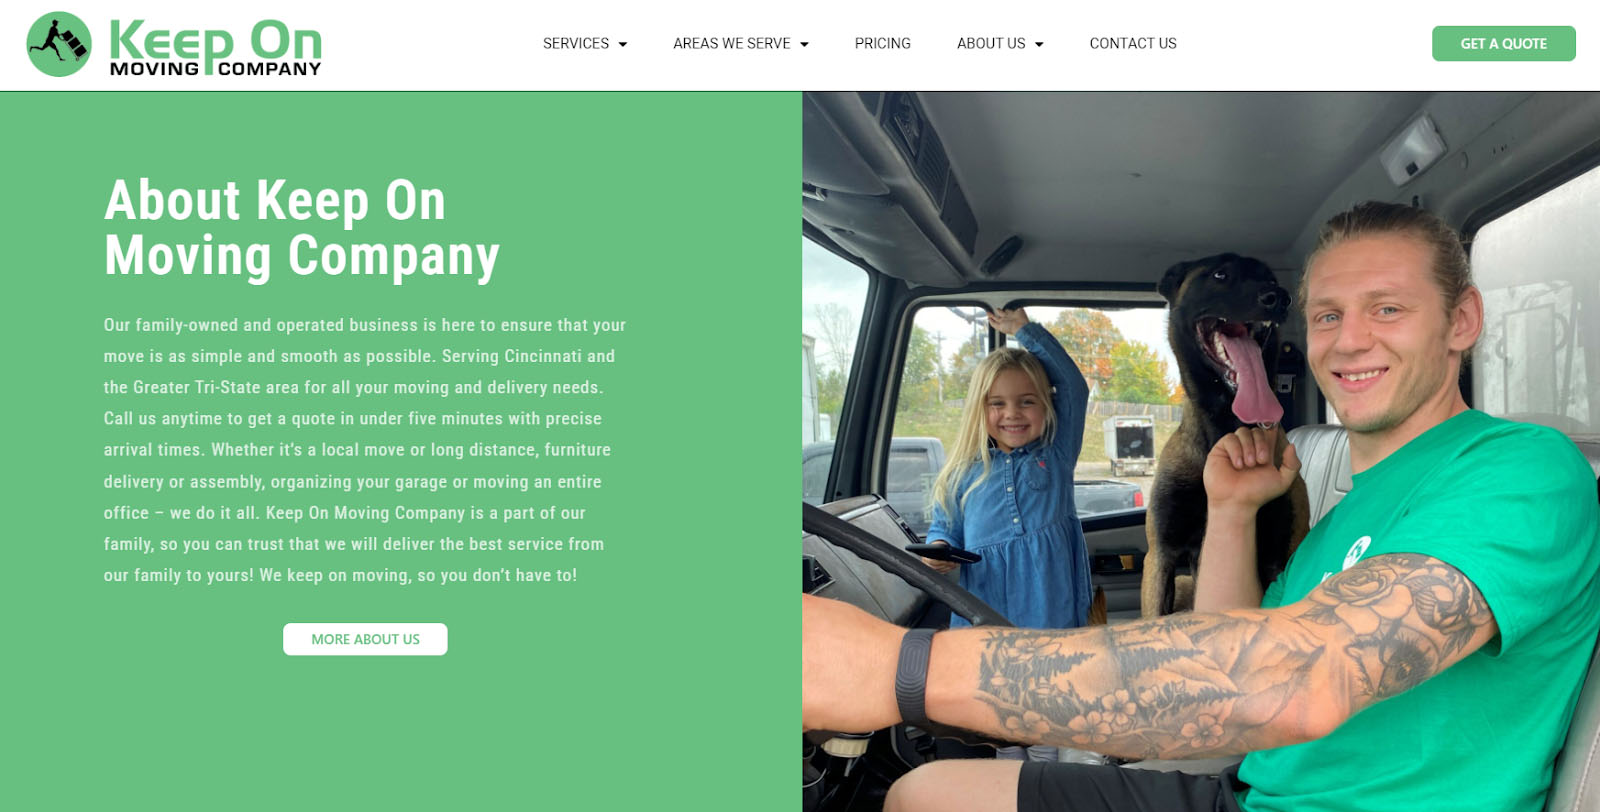 Keep On Moving website screenshot with the owner and his daughter.